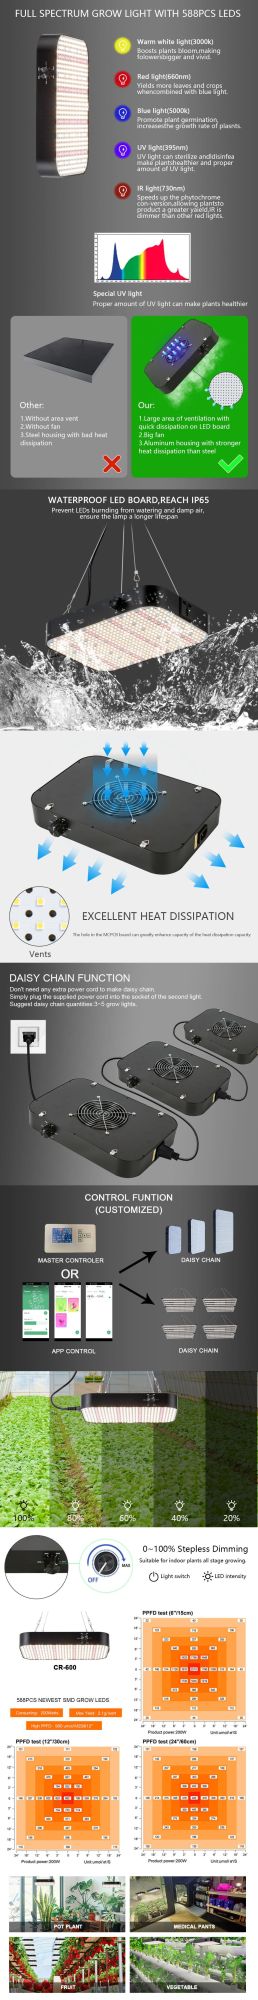 Factory Wholesale Price OEM Greenhouse Best Commercial Easy Indoor Grow Tent Waterproof Aluminum Samsung 130W LED Grow Light for Seeding Veg Bloom